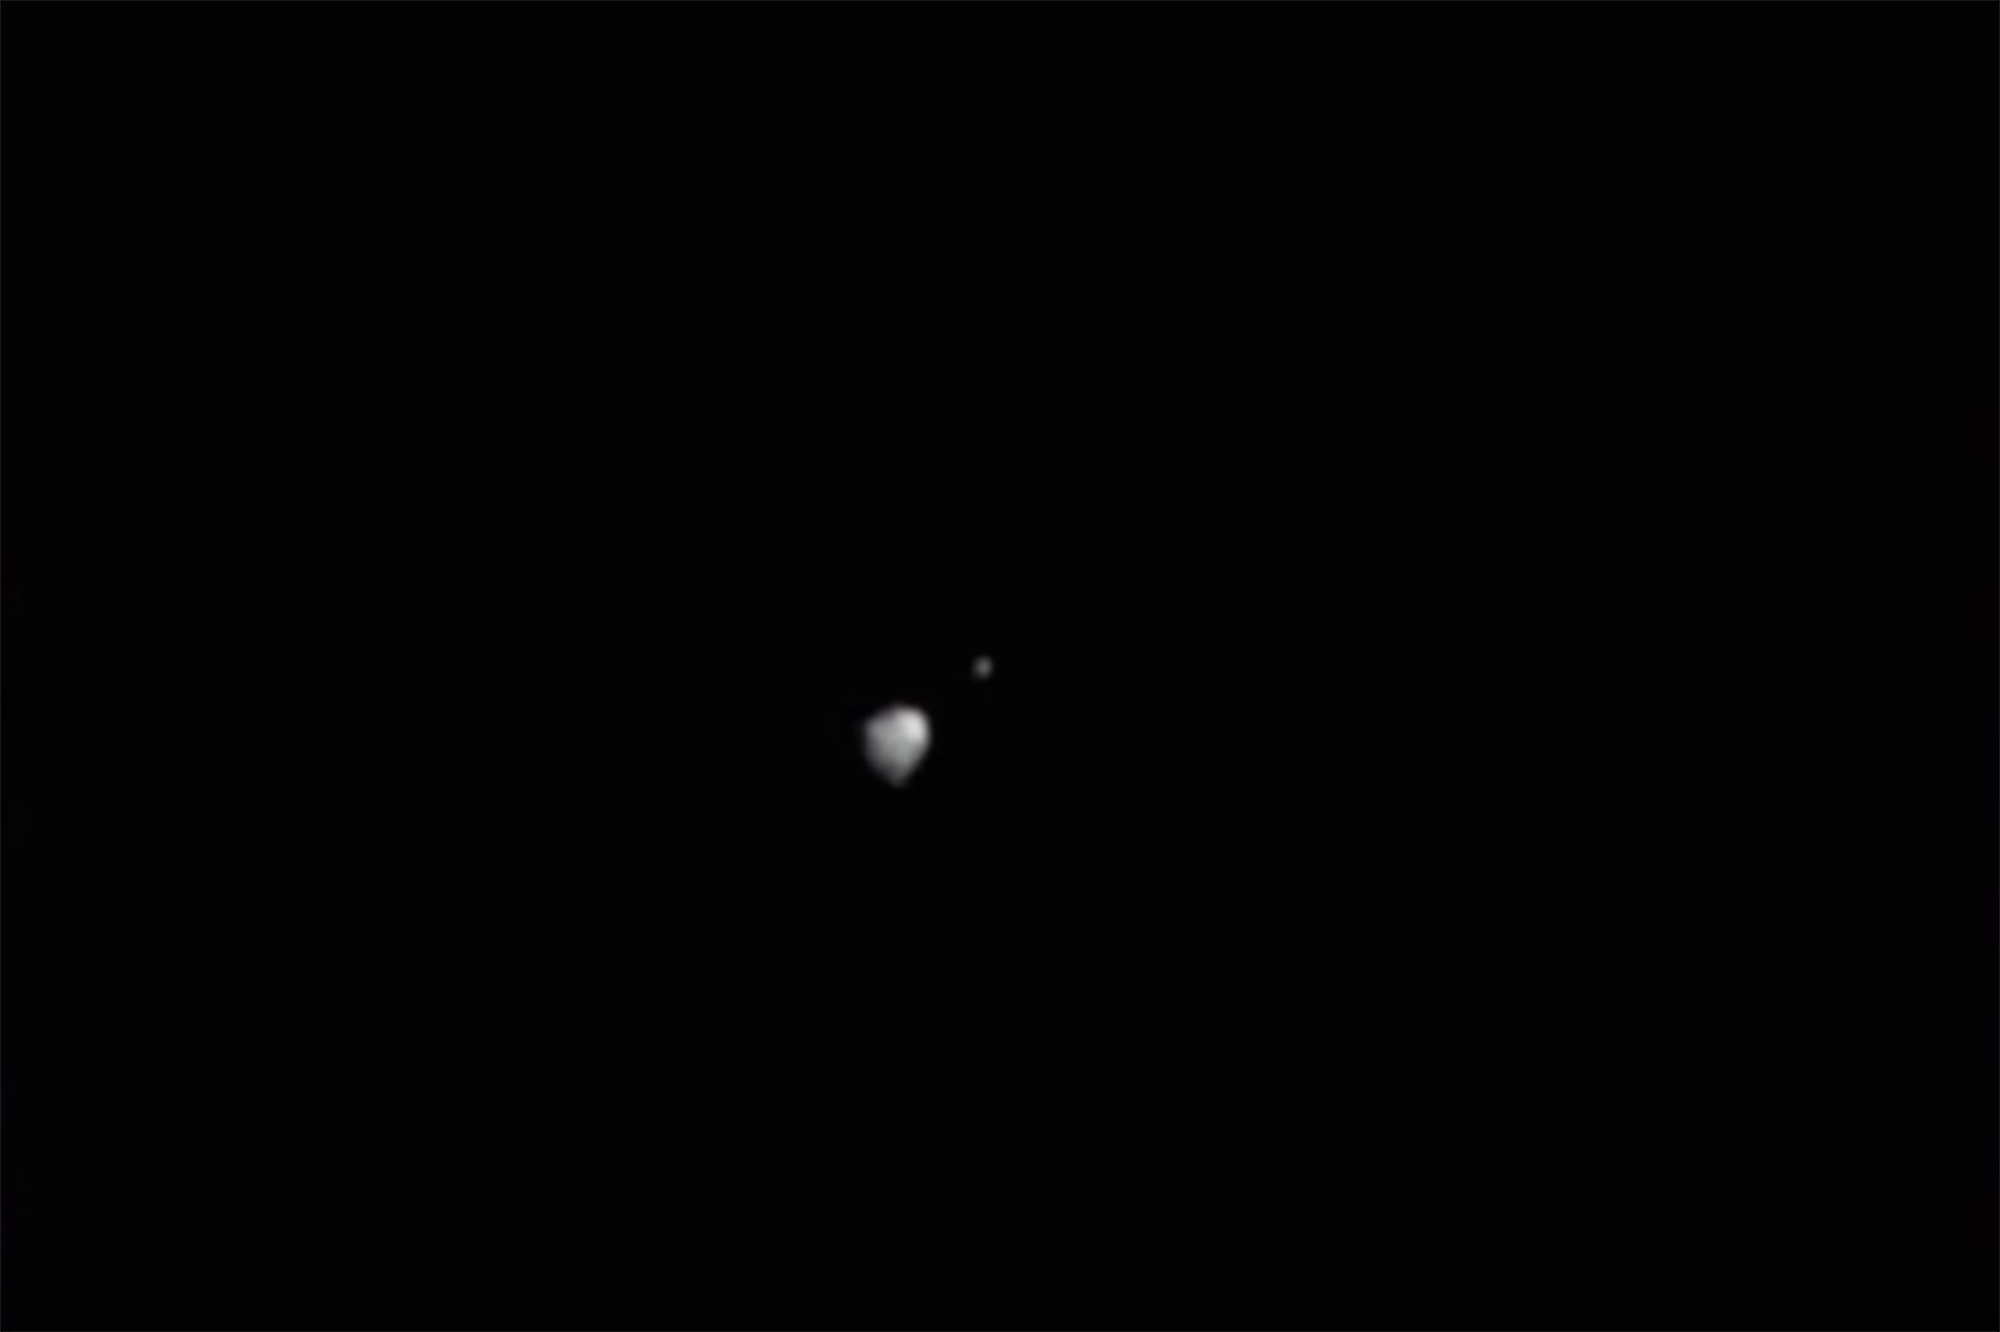 An image of Dimophos from the DART spacecraft, after precision lock at 20 minutes to impact.